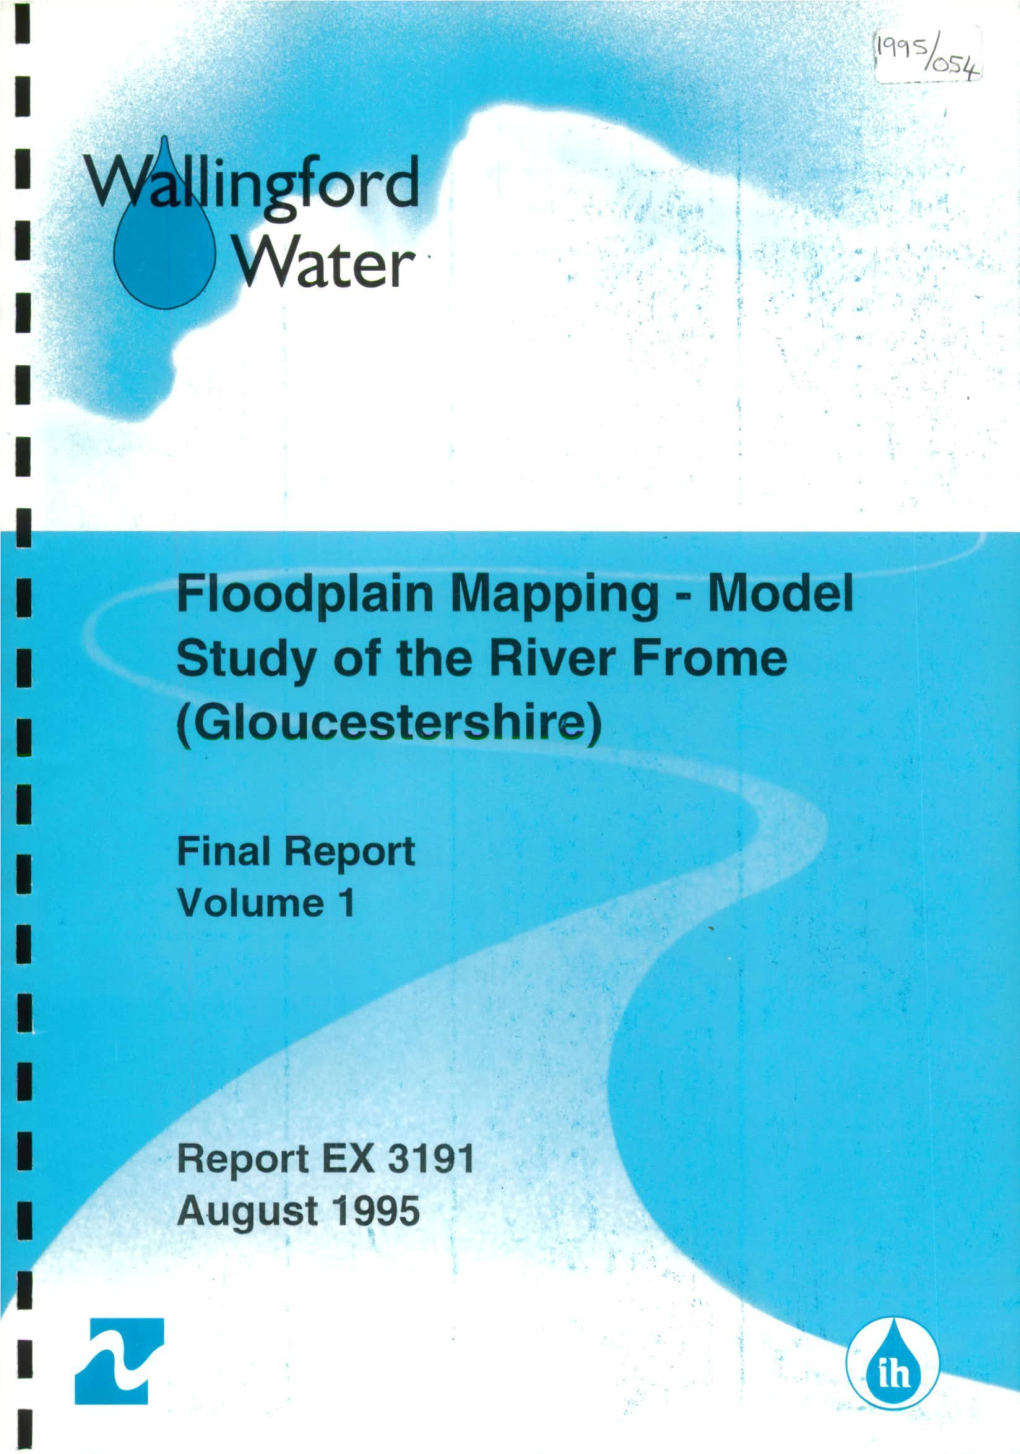 Model Study of the River Frome (Gloucestershire)